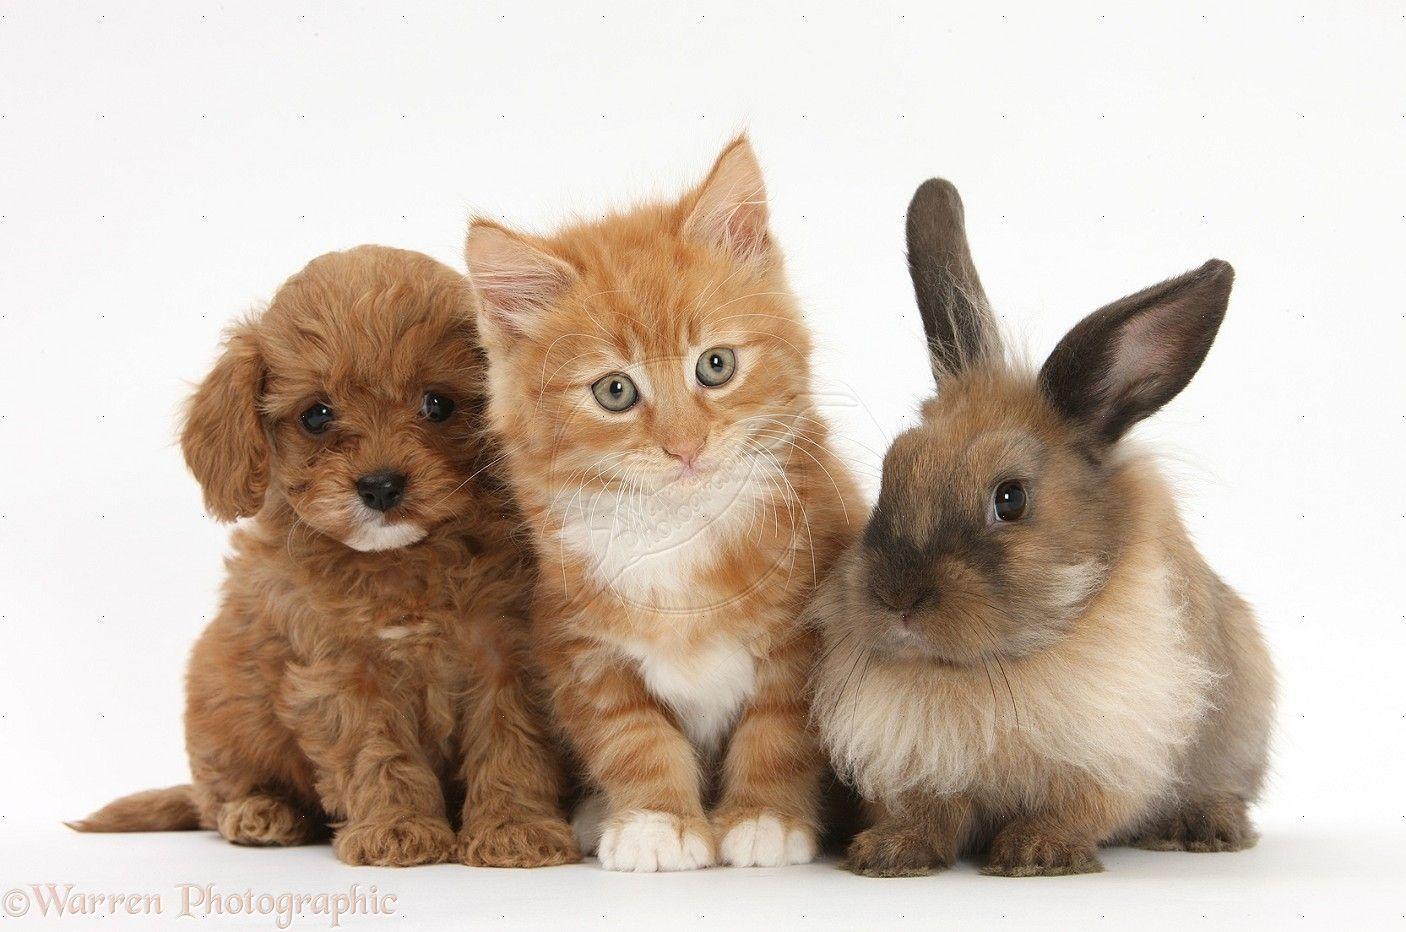 Kittens And Puppies Image Gallery